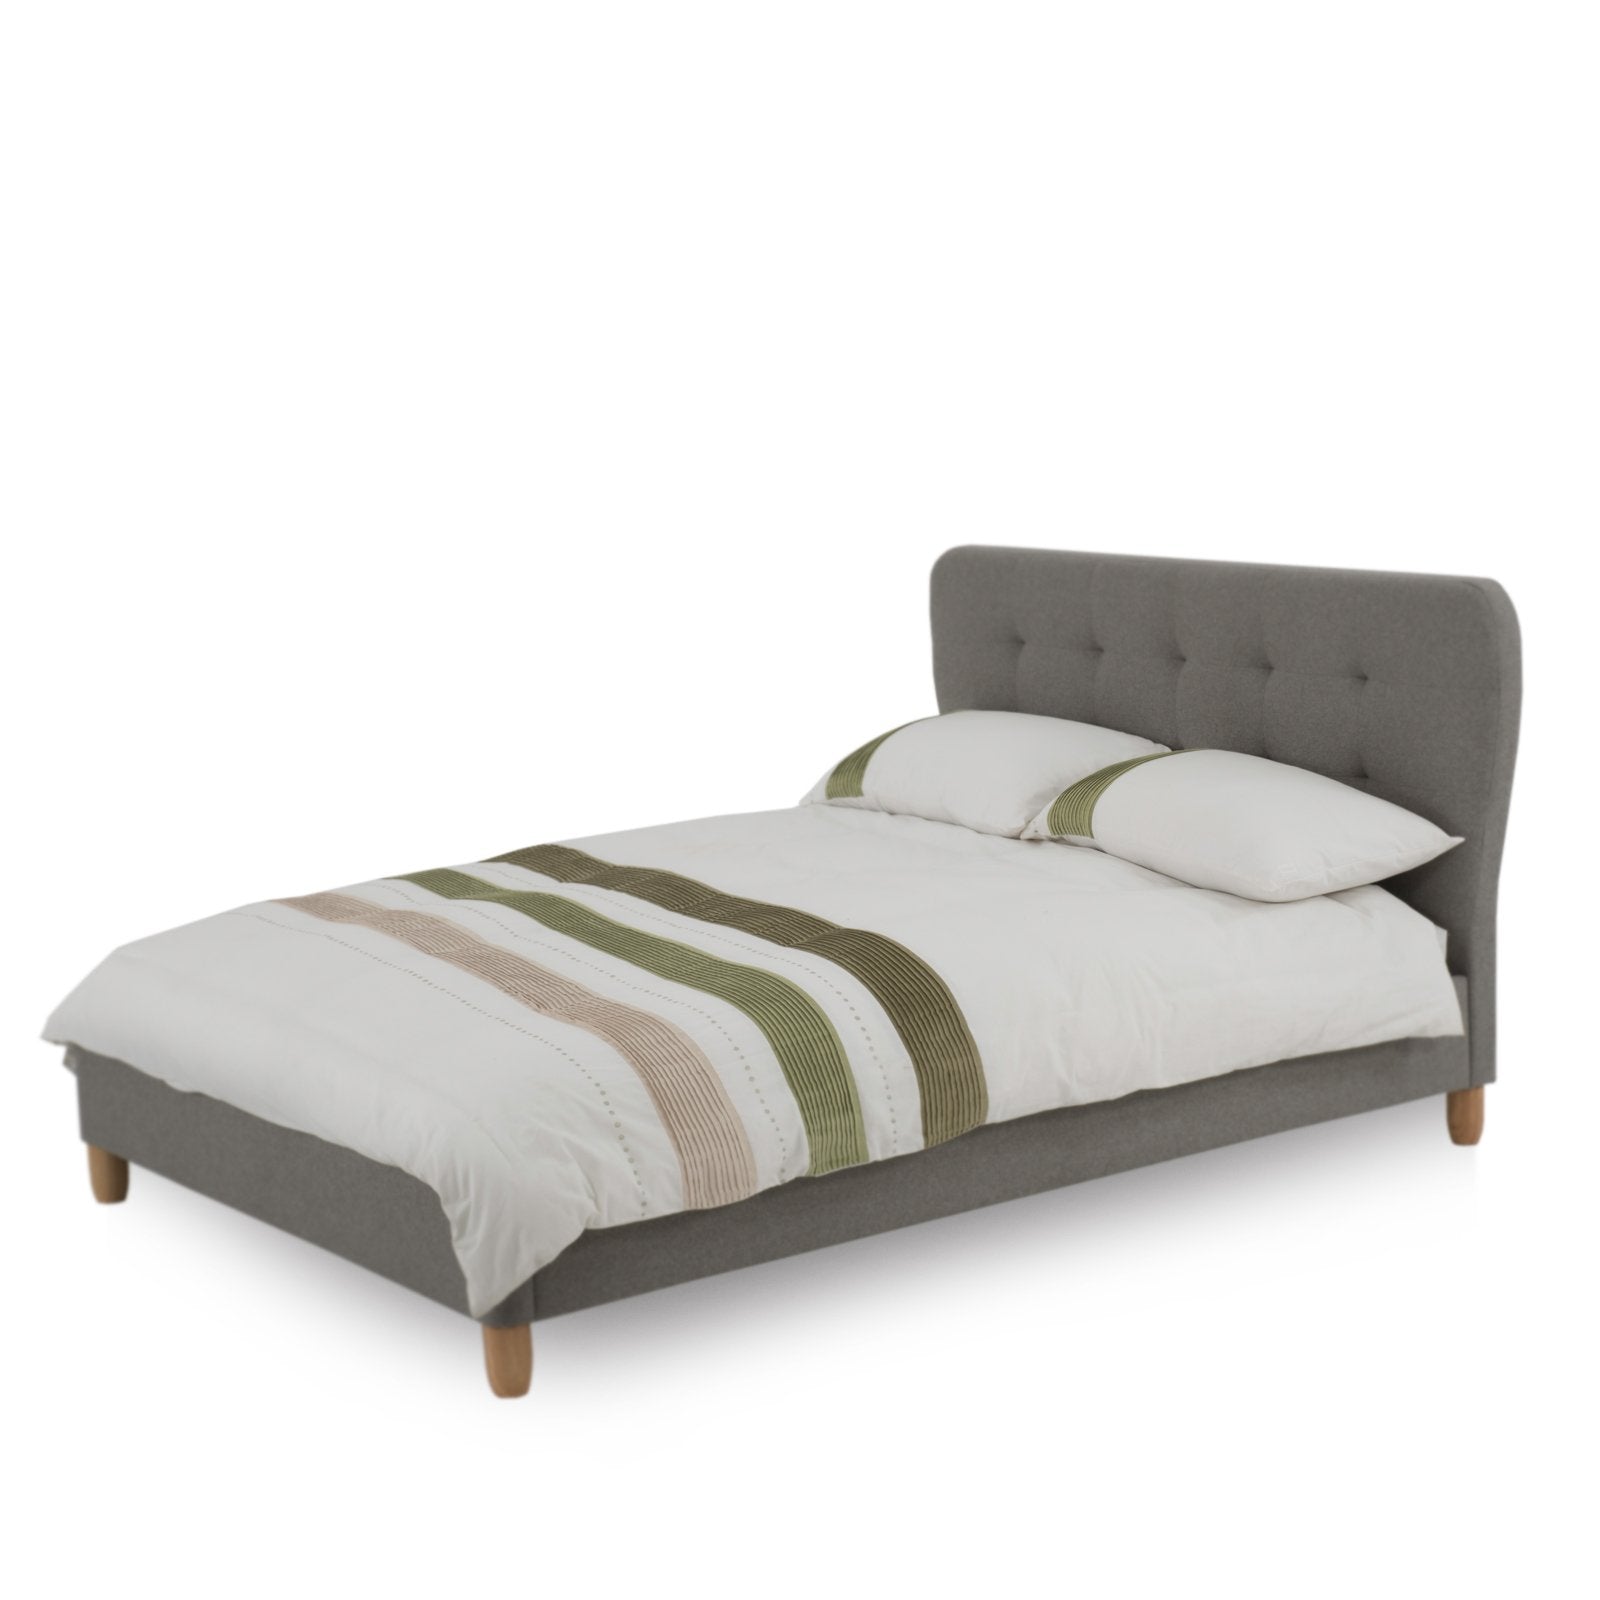 Isla Fabric Wing Queen Bed Frame - Fossil Grey - Beds